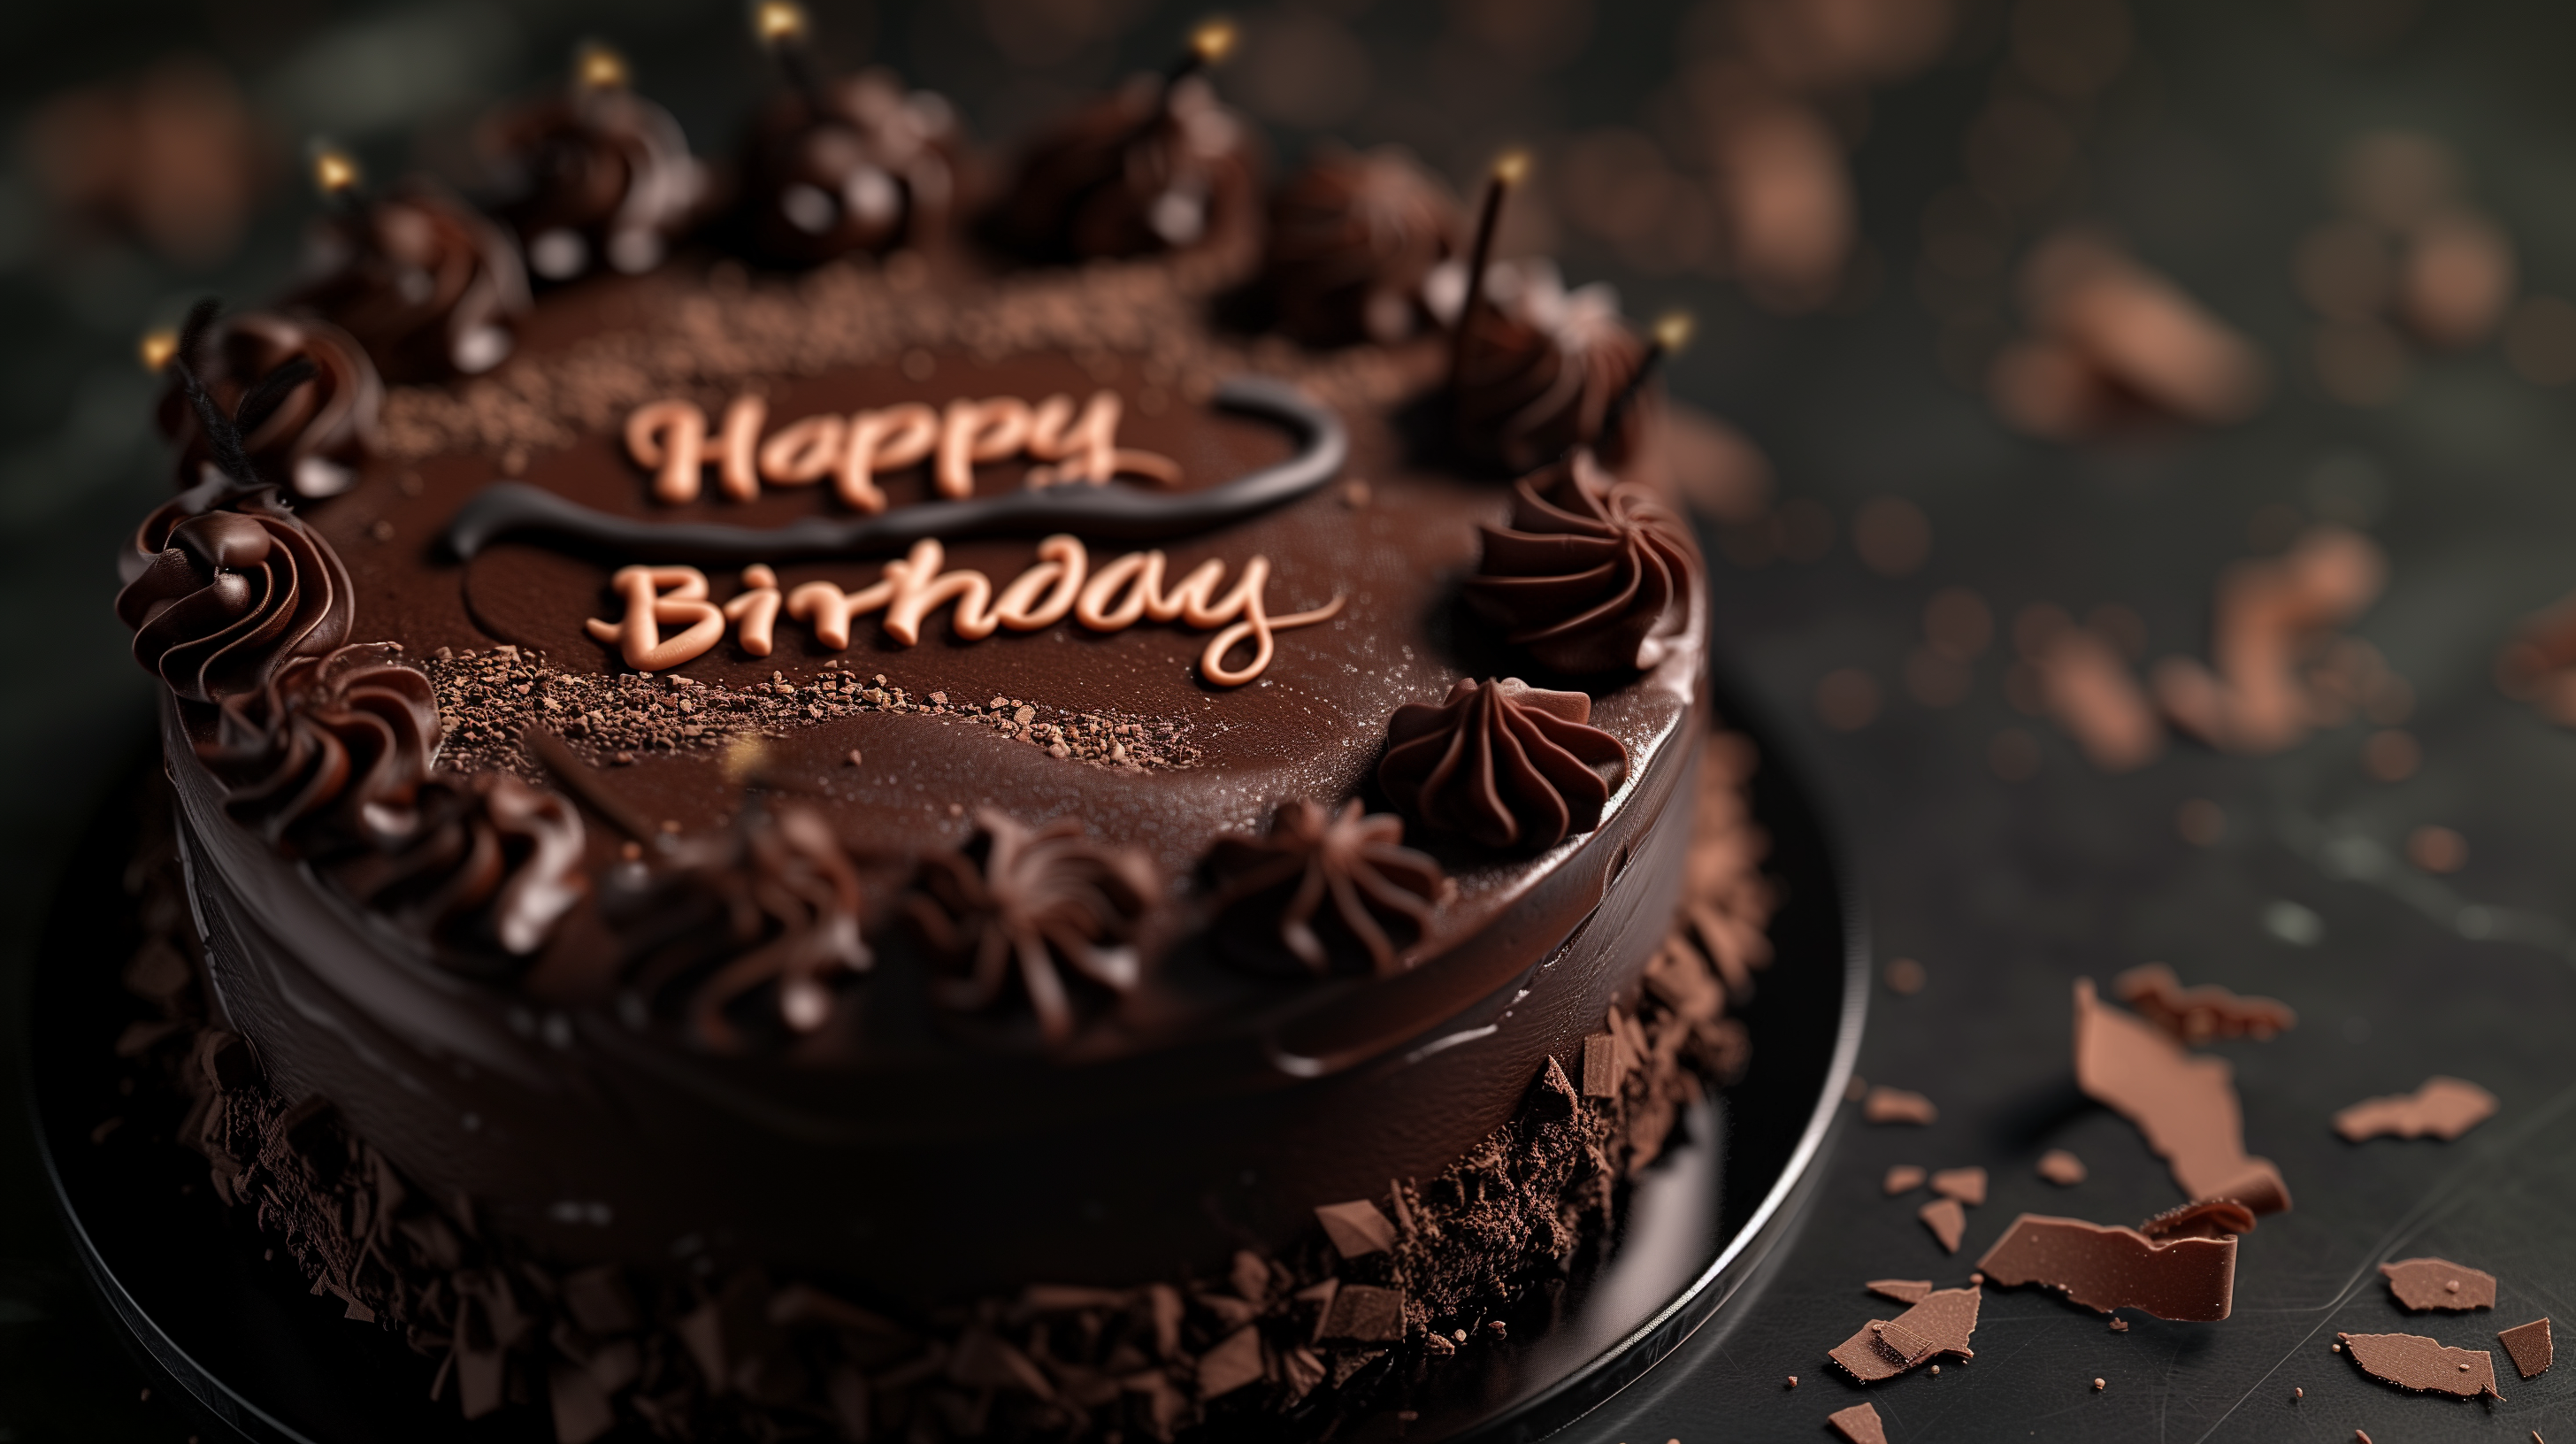 HD wallpaper of a decadent chocolate Happy Birthday cake ideal for desktop background.